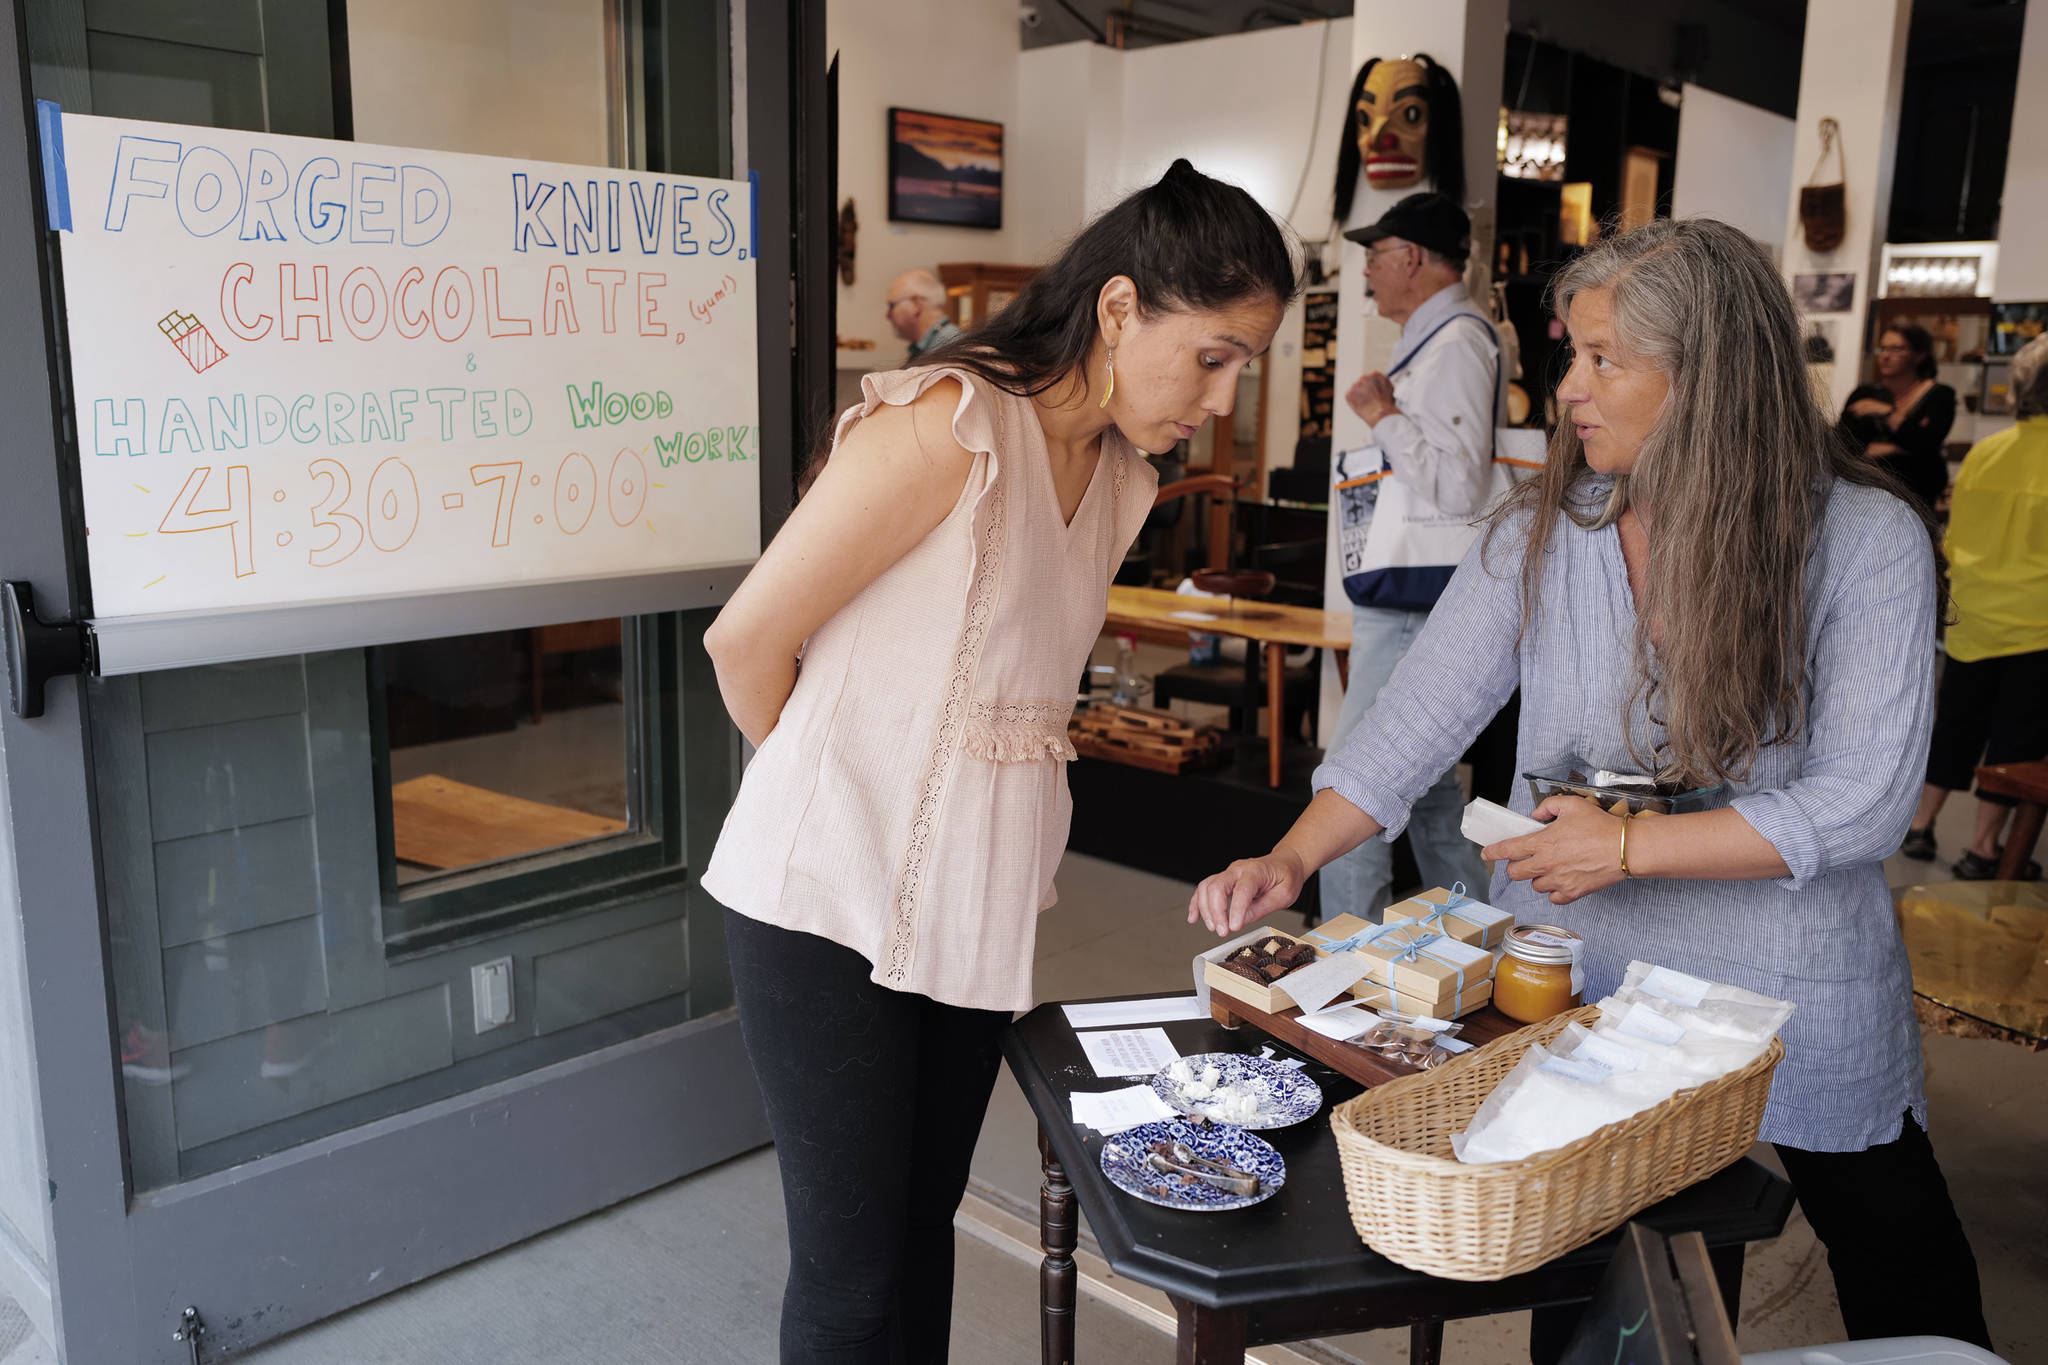 Marta Lastufka, right, owner of Sweet Song Chocolates, shows her wares to Elia Salinas during First Friday at Rainforest Designs on South Franklin Street on Friday, July 5, 2019. Lastufka was one of three featured artists at the local artisans shop. Wood worker Henry Webb and knife maker Liam Penn were also featured. (Michael Penn | Juneau Empire)